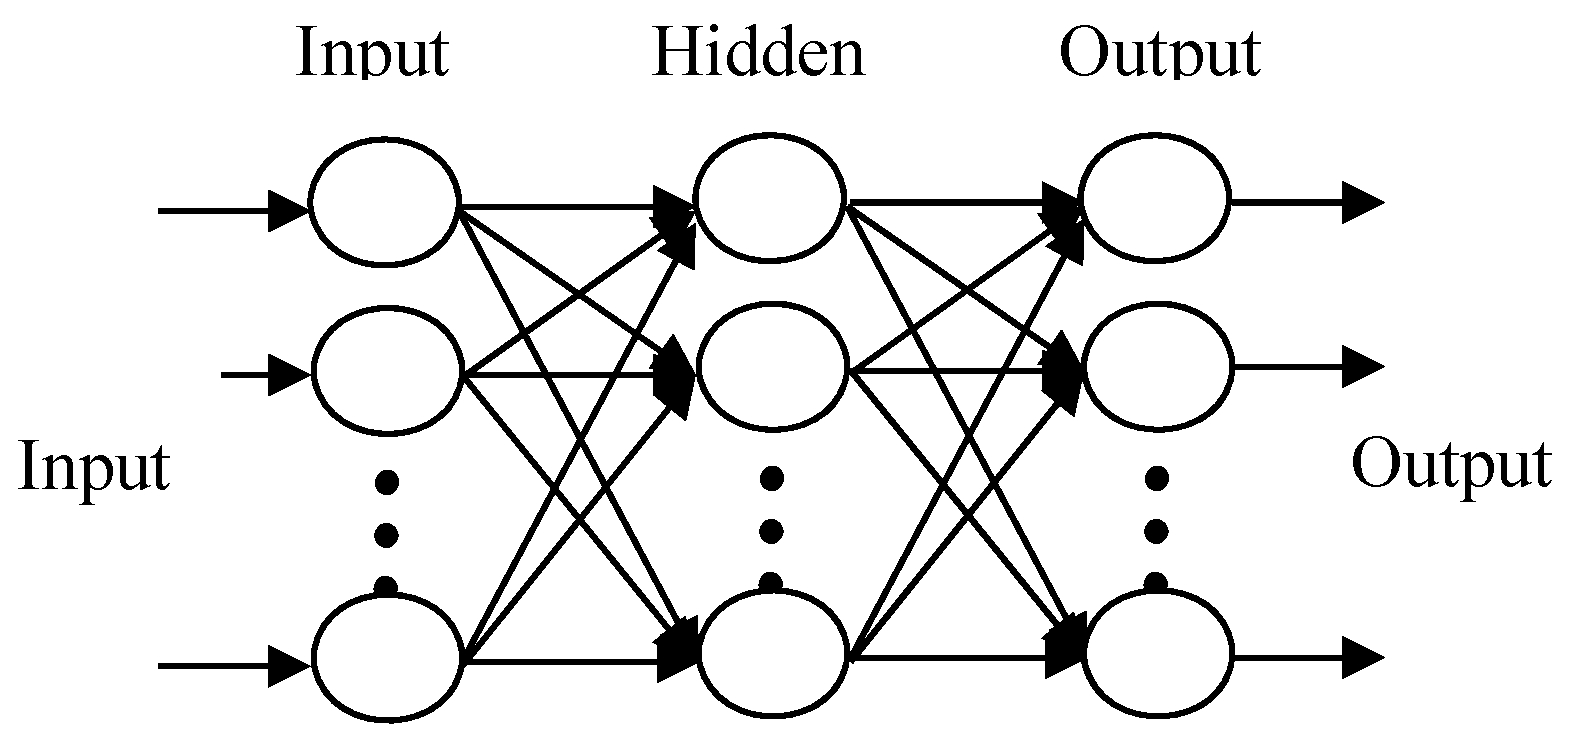 BP networks model structure